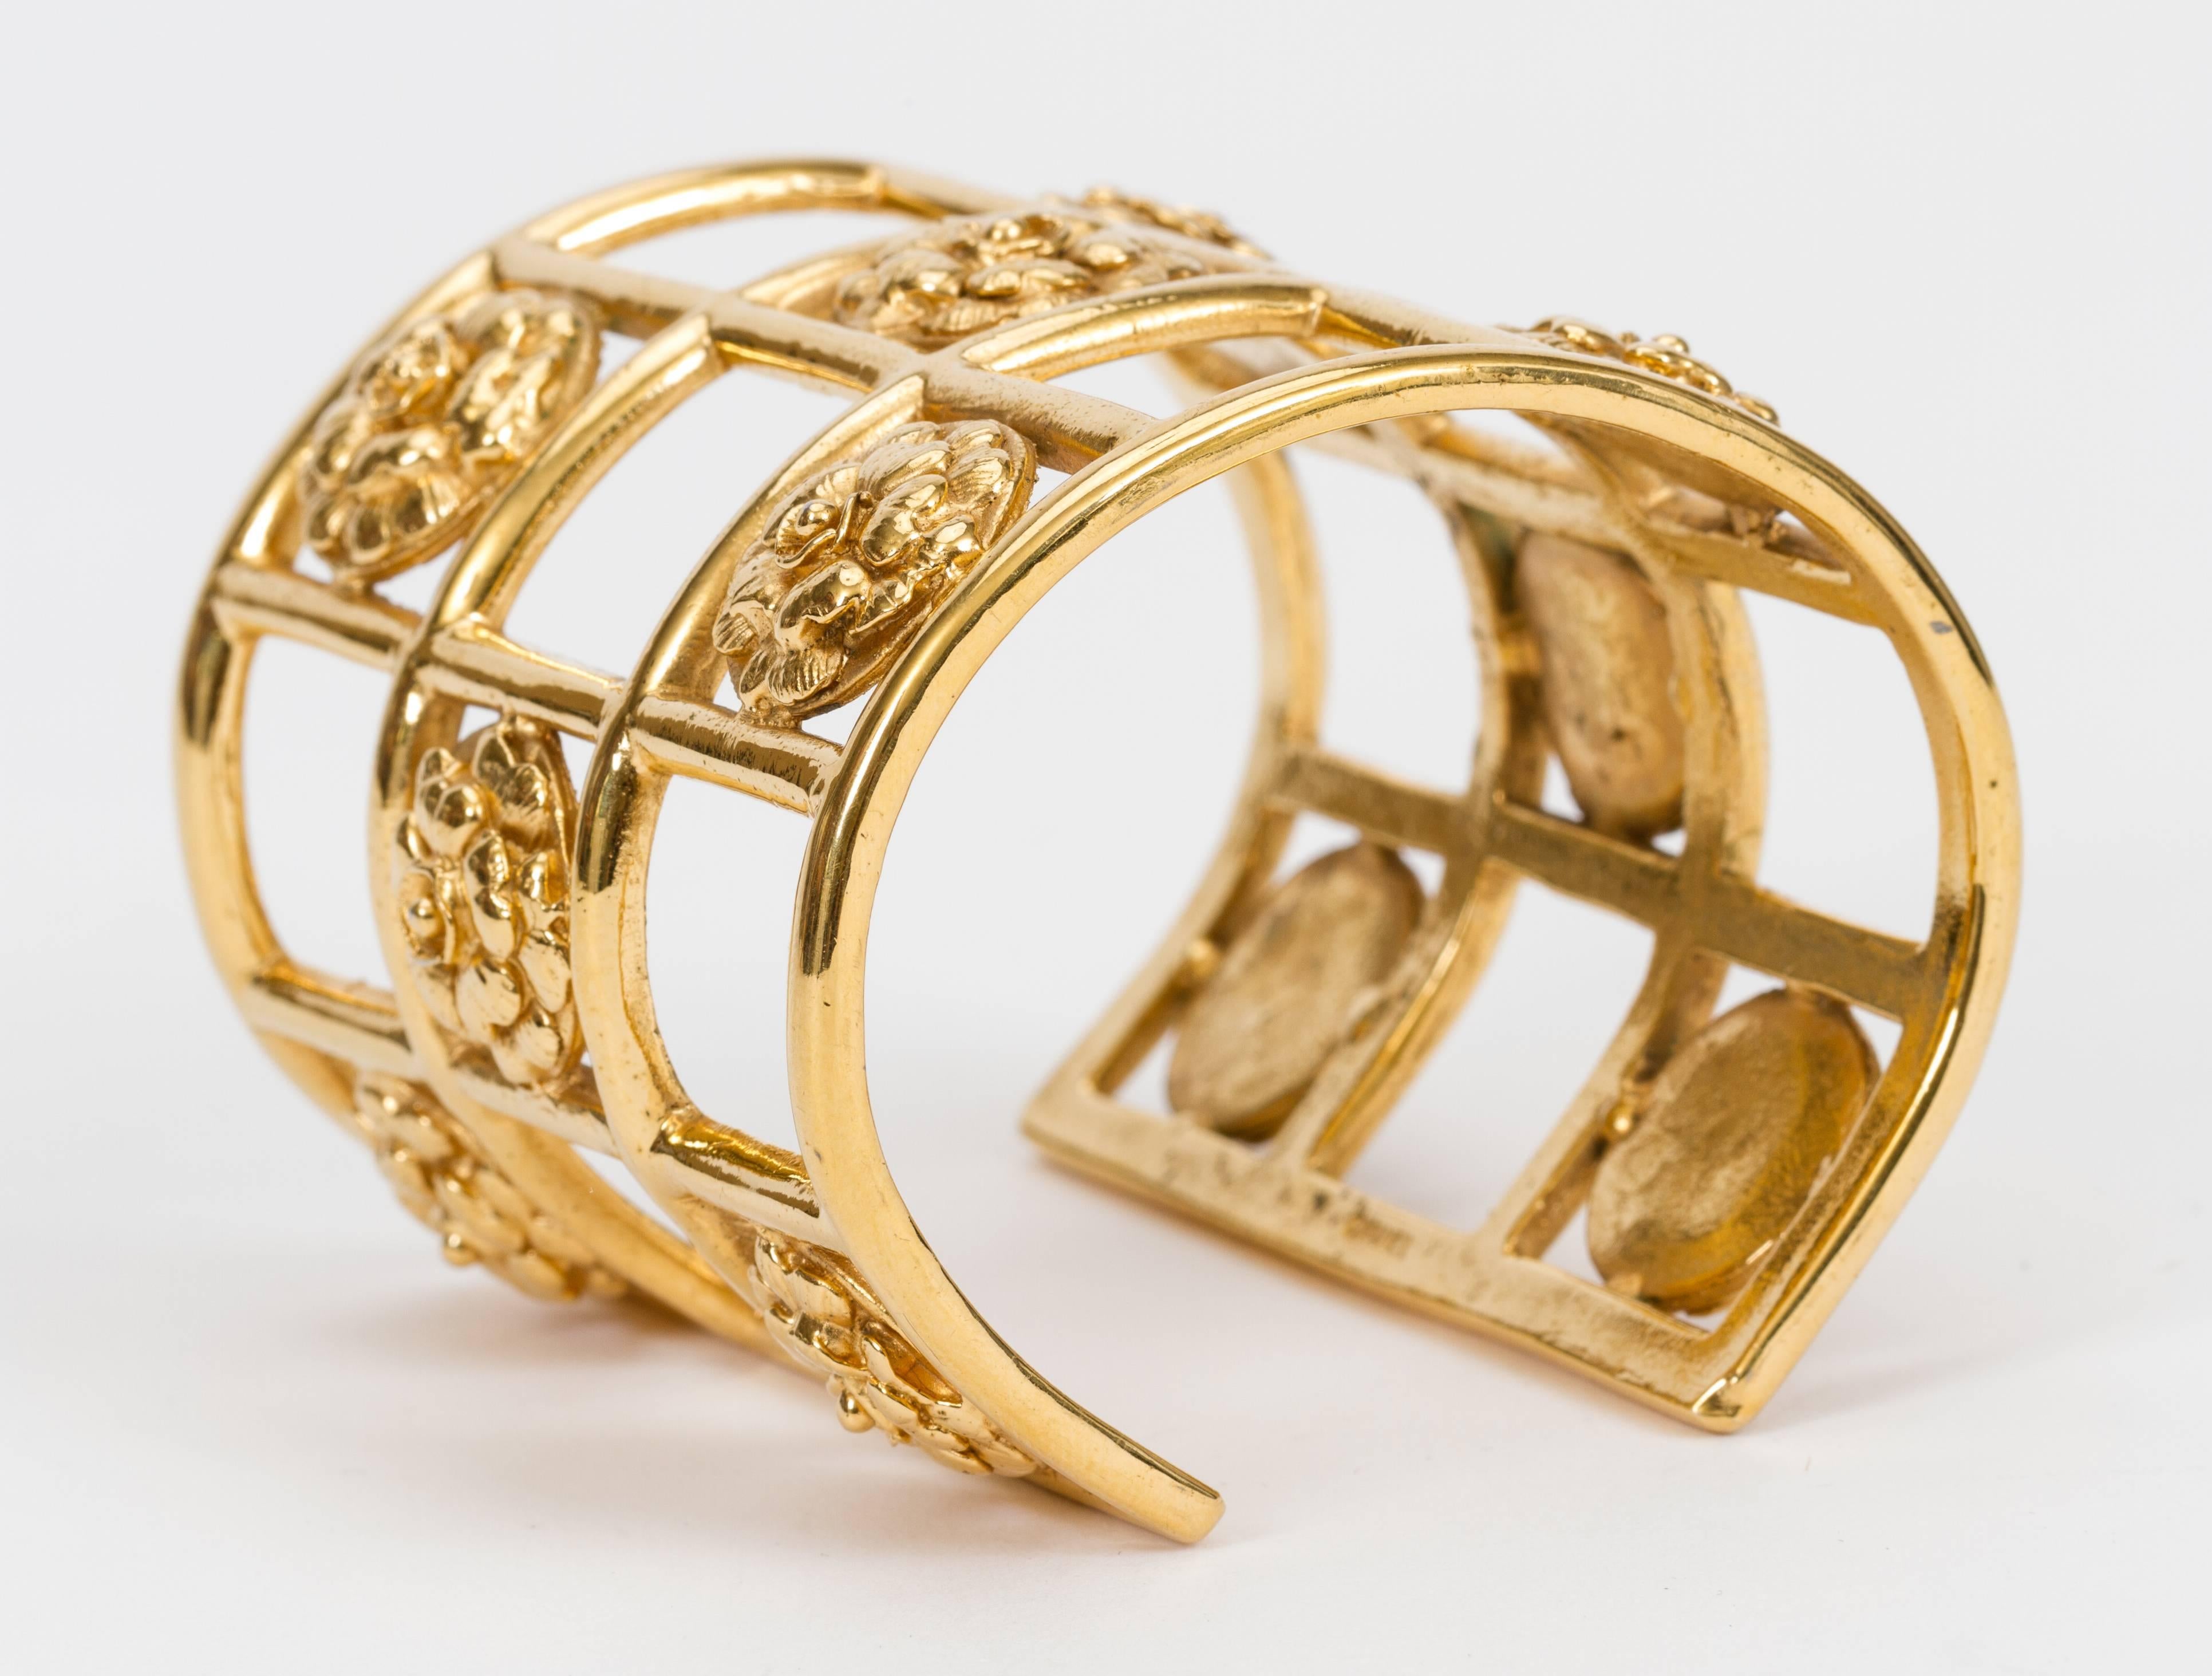 Chanel 70s camellia cage large cuff bracelet. Cuff opening 1